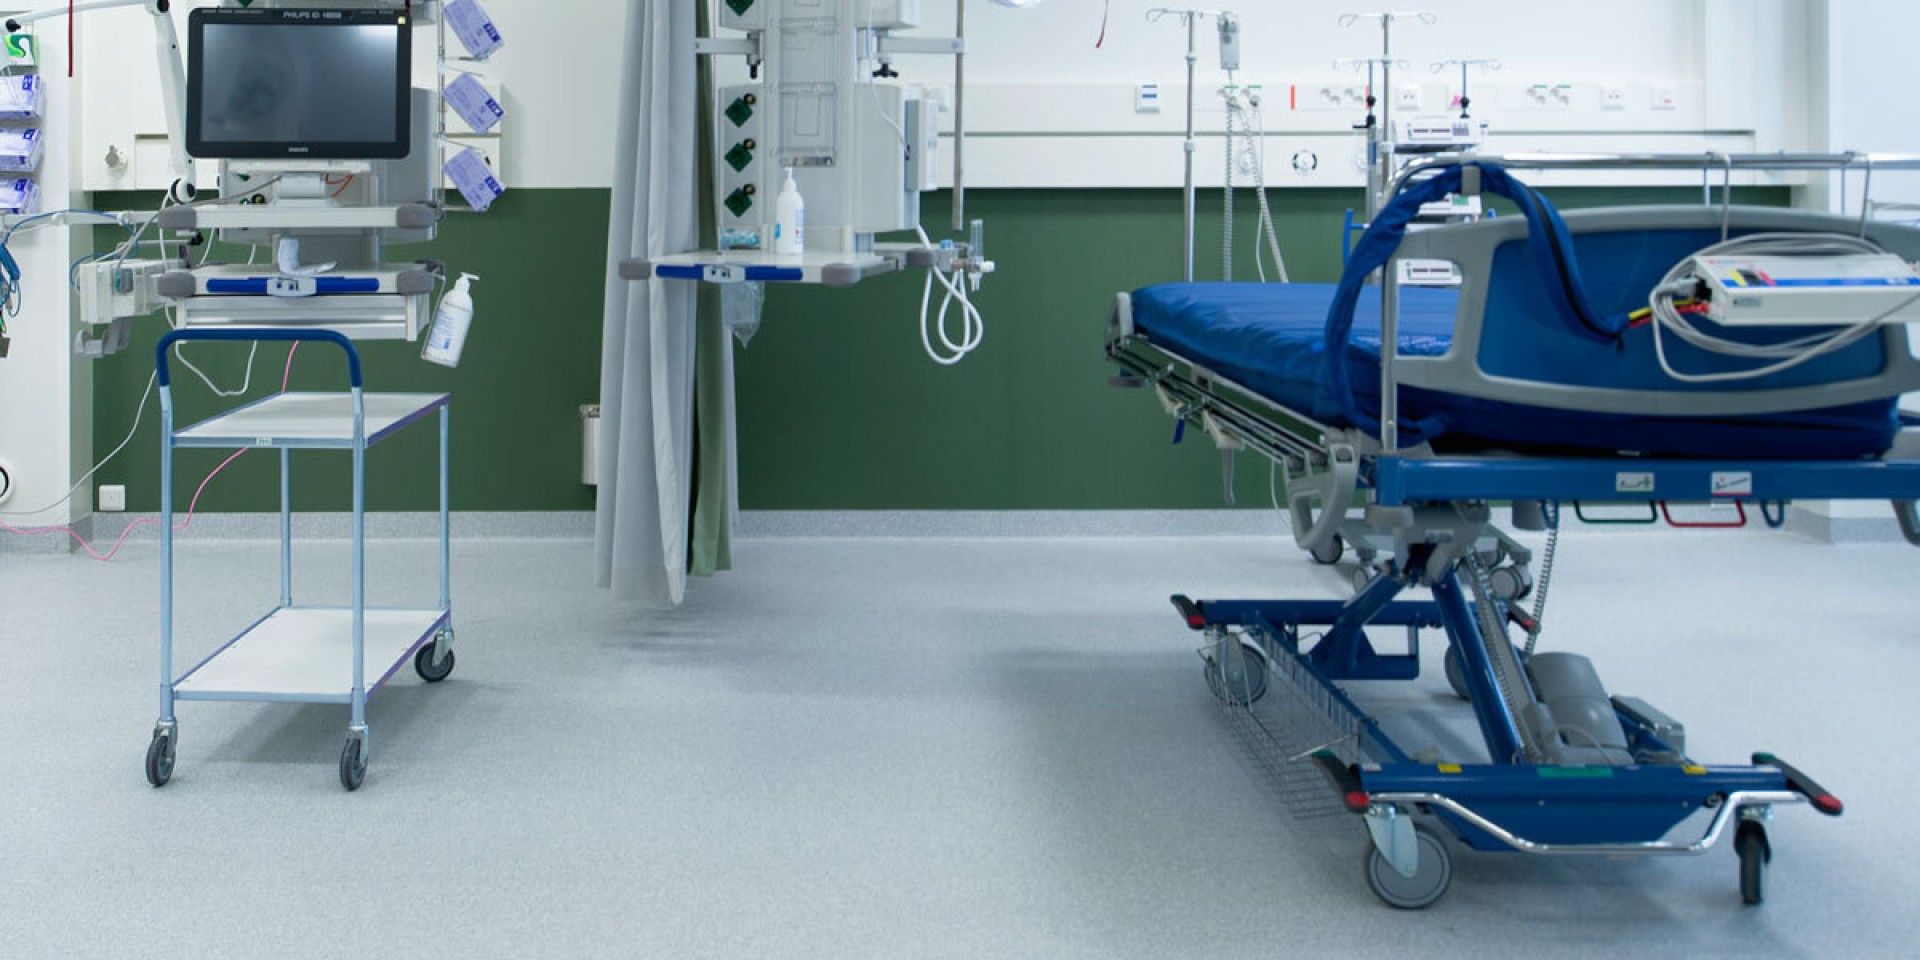 Coating solutions for floors in healthcare facilities and pharmaceutical premises